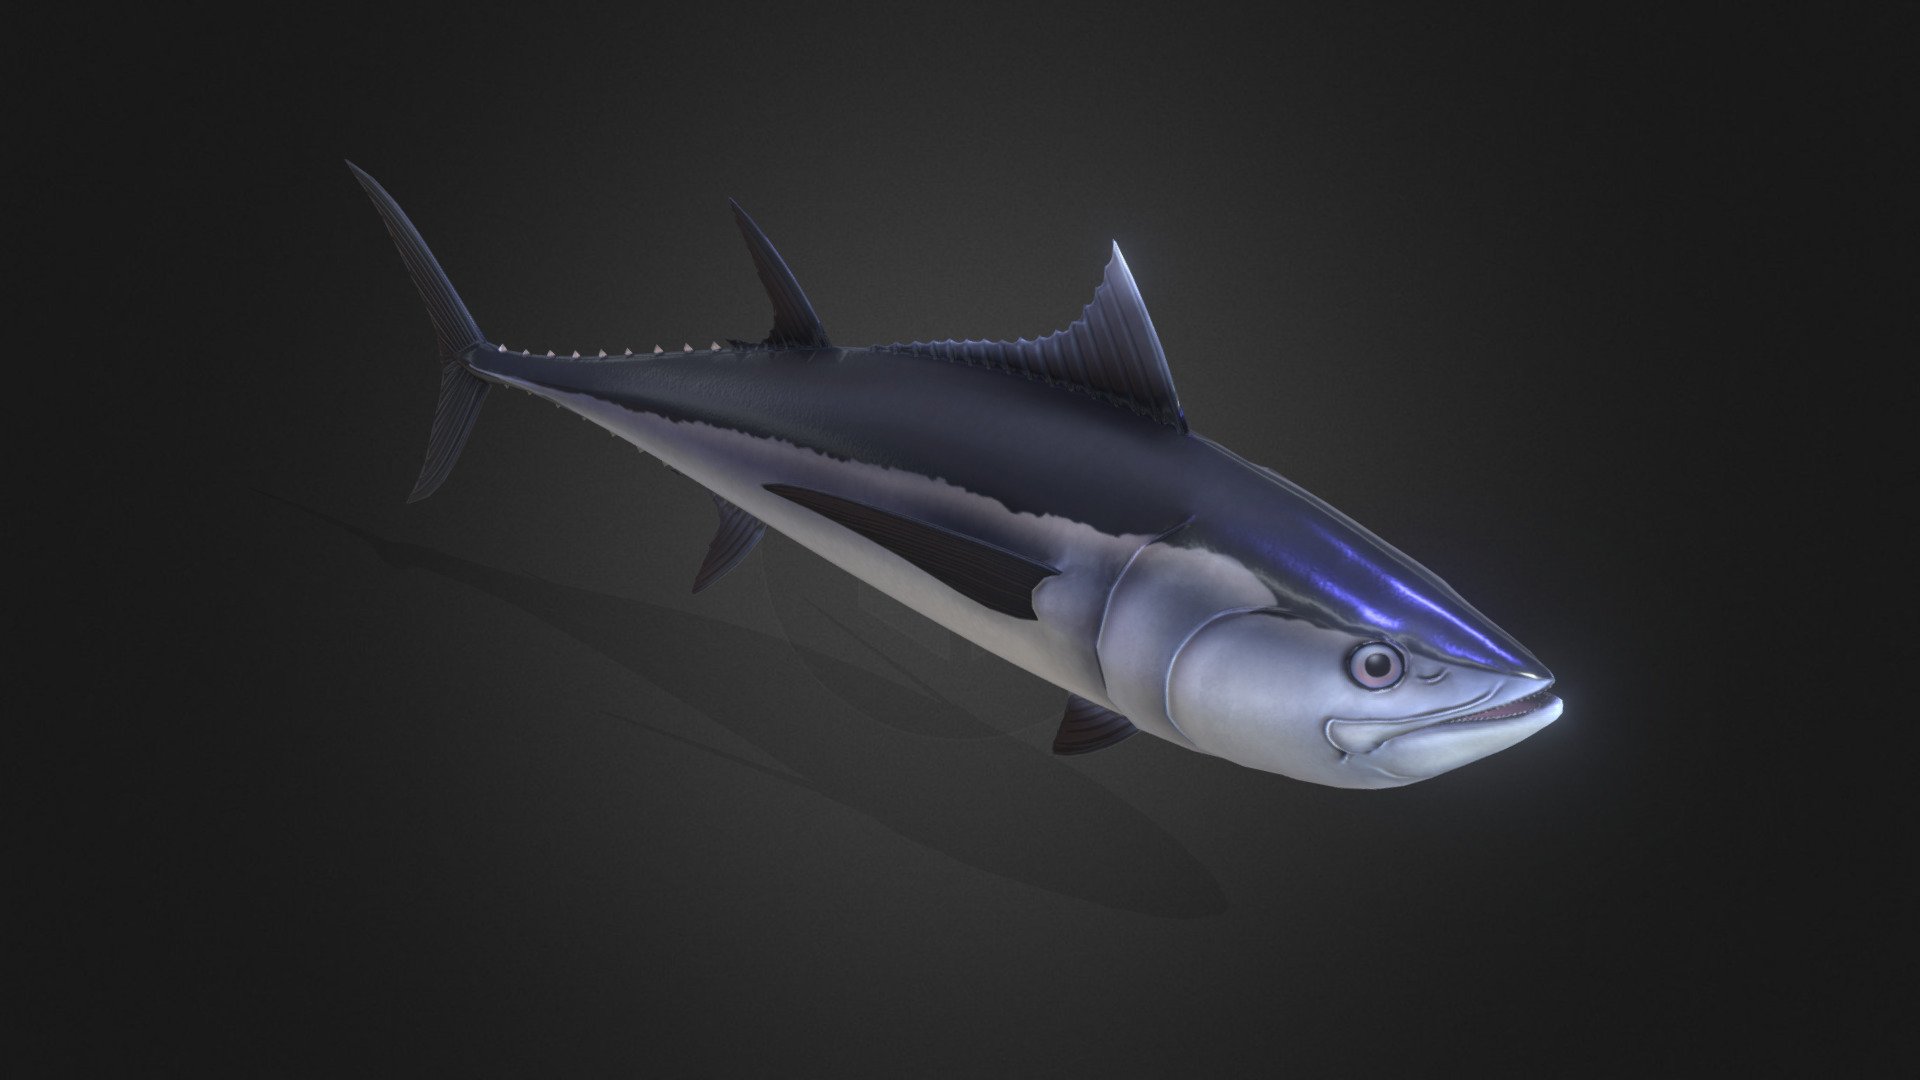 Thunnus tonggol. It is commonly known as the longtail tuna or northern bluefin tuna. The usage of the latter name, mainly in Australia to distinguish it from the southern bluefin tuna, leads to easy confusion with Thunnus thynnus of the Atlantic and Thunnus orientalis of the North Pacific 3d model